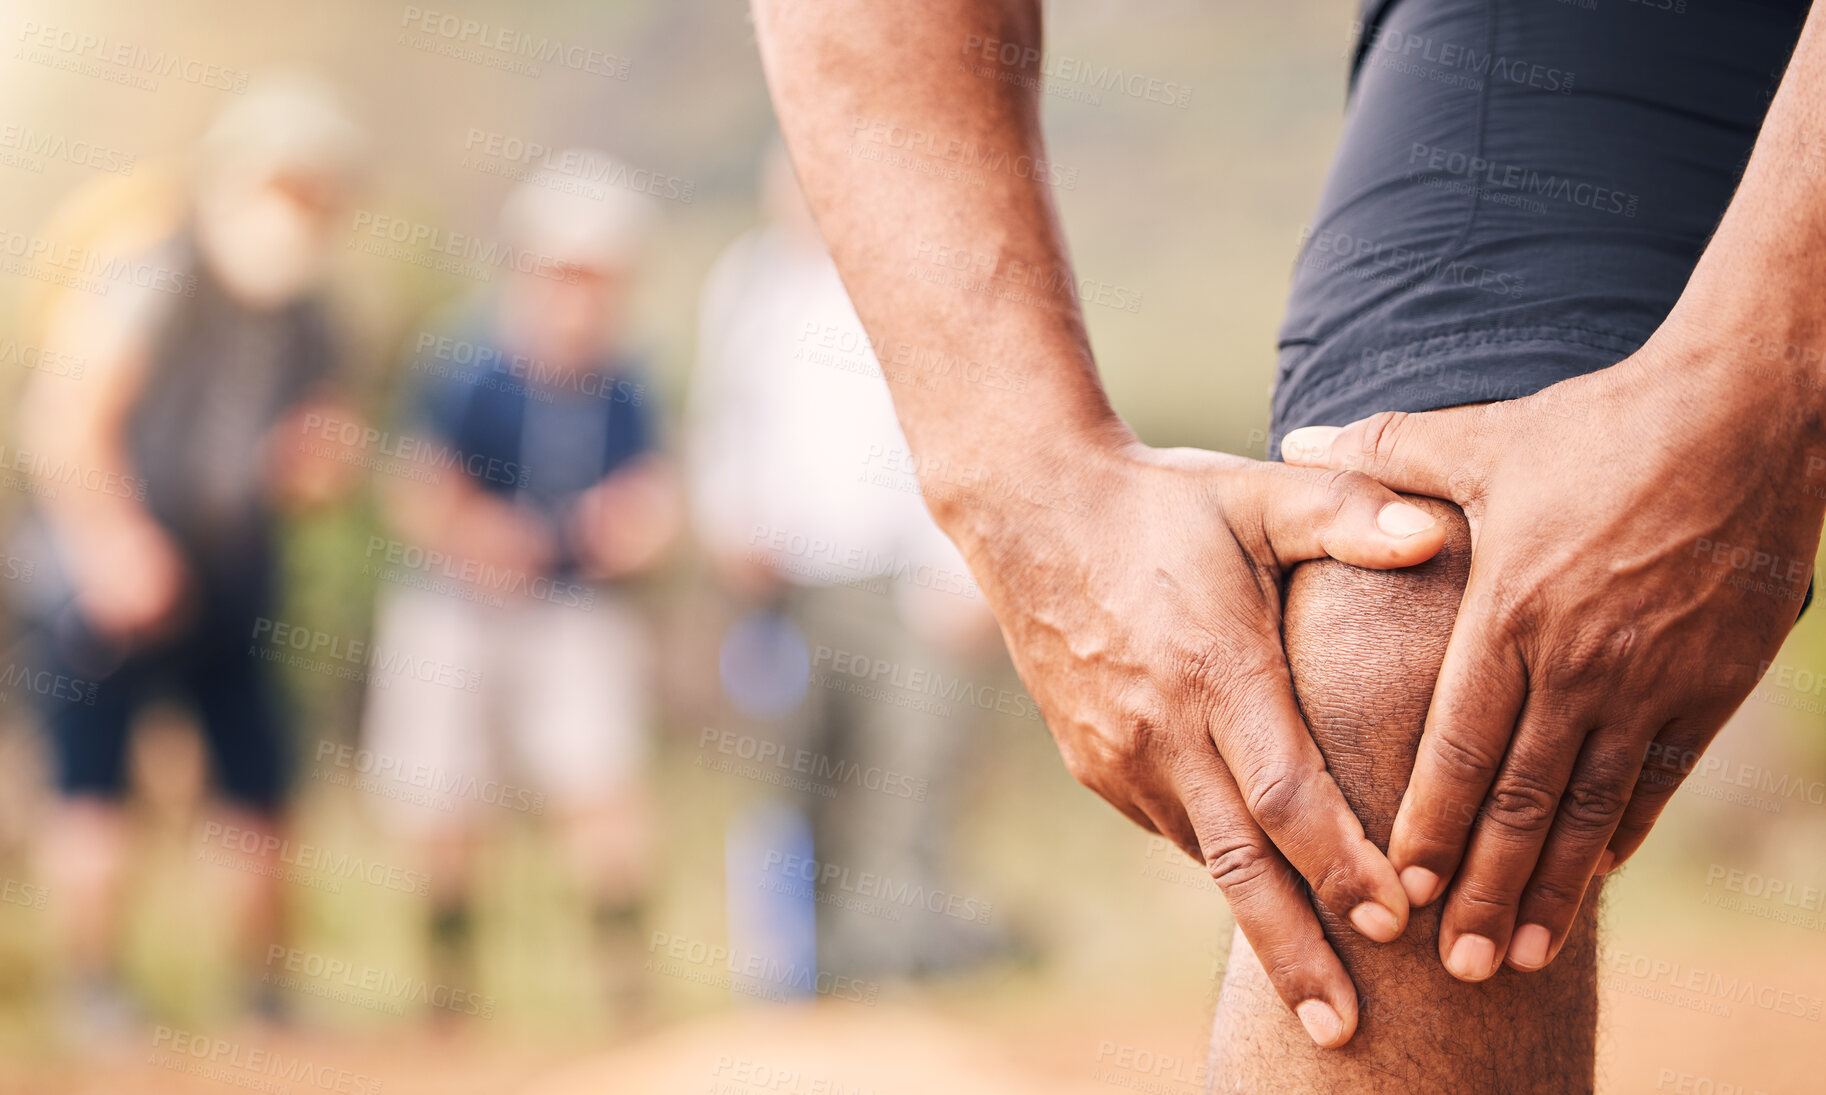 Buy stock photo Knee pain, injury and hands of senior black man after hiking accident outdoors. Sports, training hike or elderly male with fibromyalgia, leg inflammation or arthritis, broken bones or painful muscles